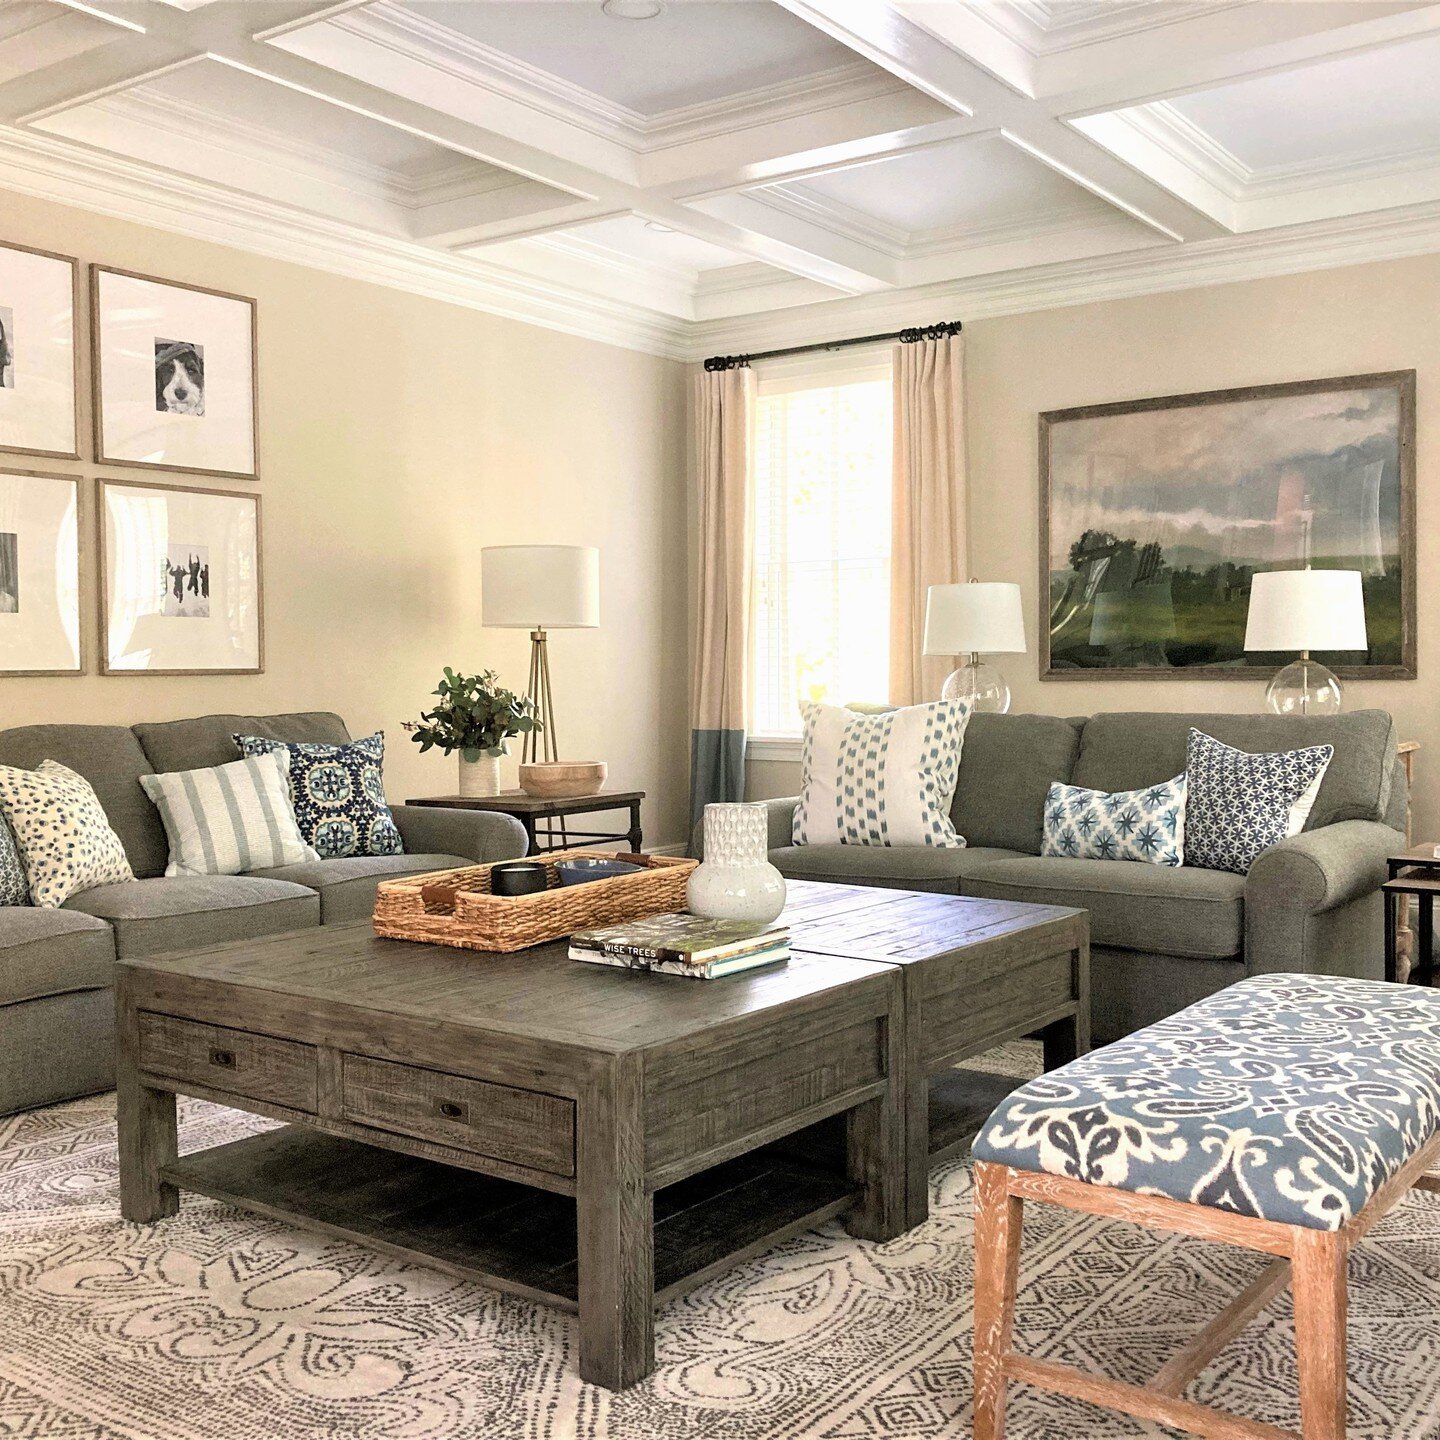 Looking forward to lots of family room time this weekend! In this space, two coffee tables are better than one to properly fill the space and allow everyone in any seating spot to reach the surface, balancing style with functionality.